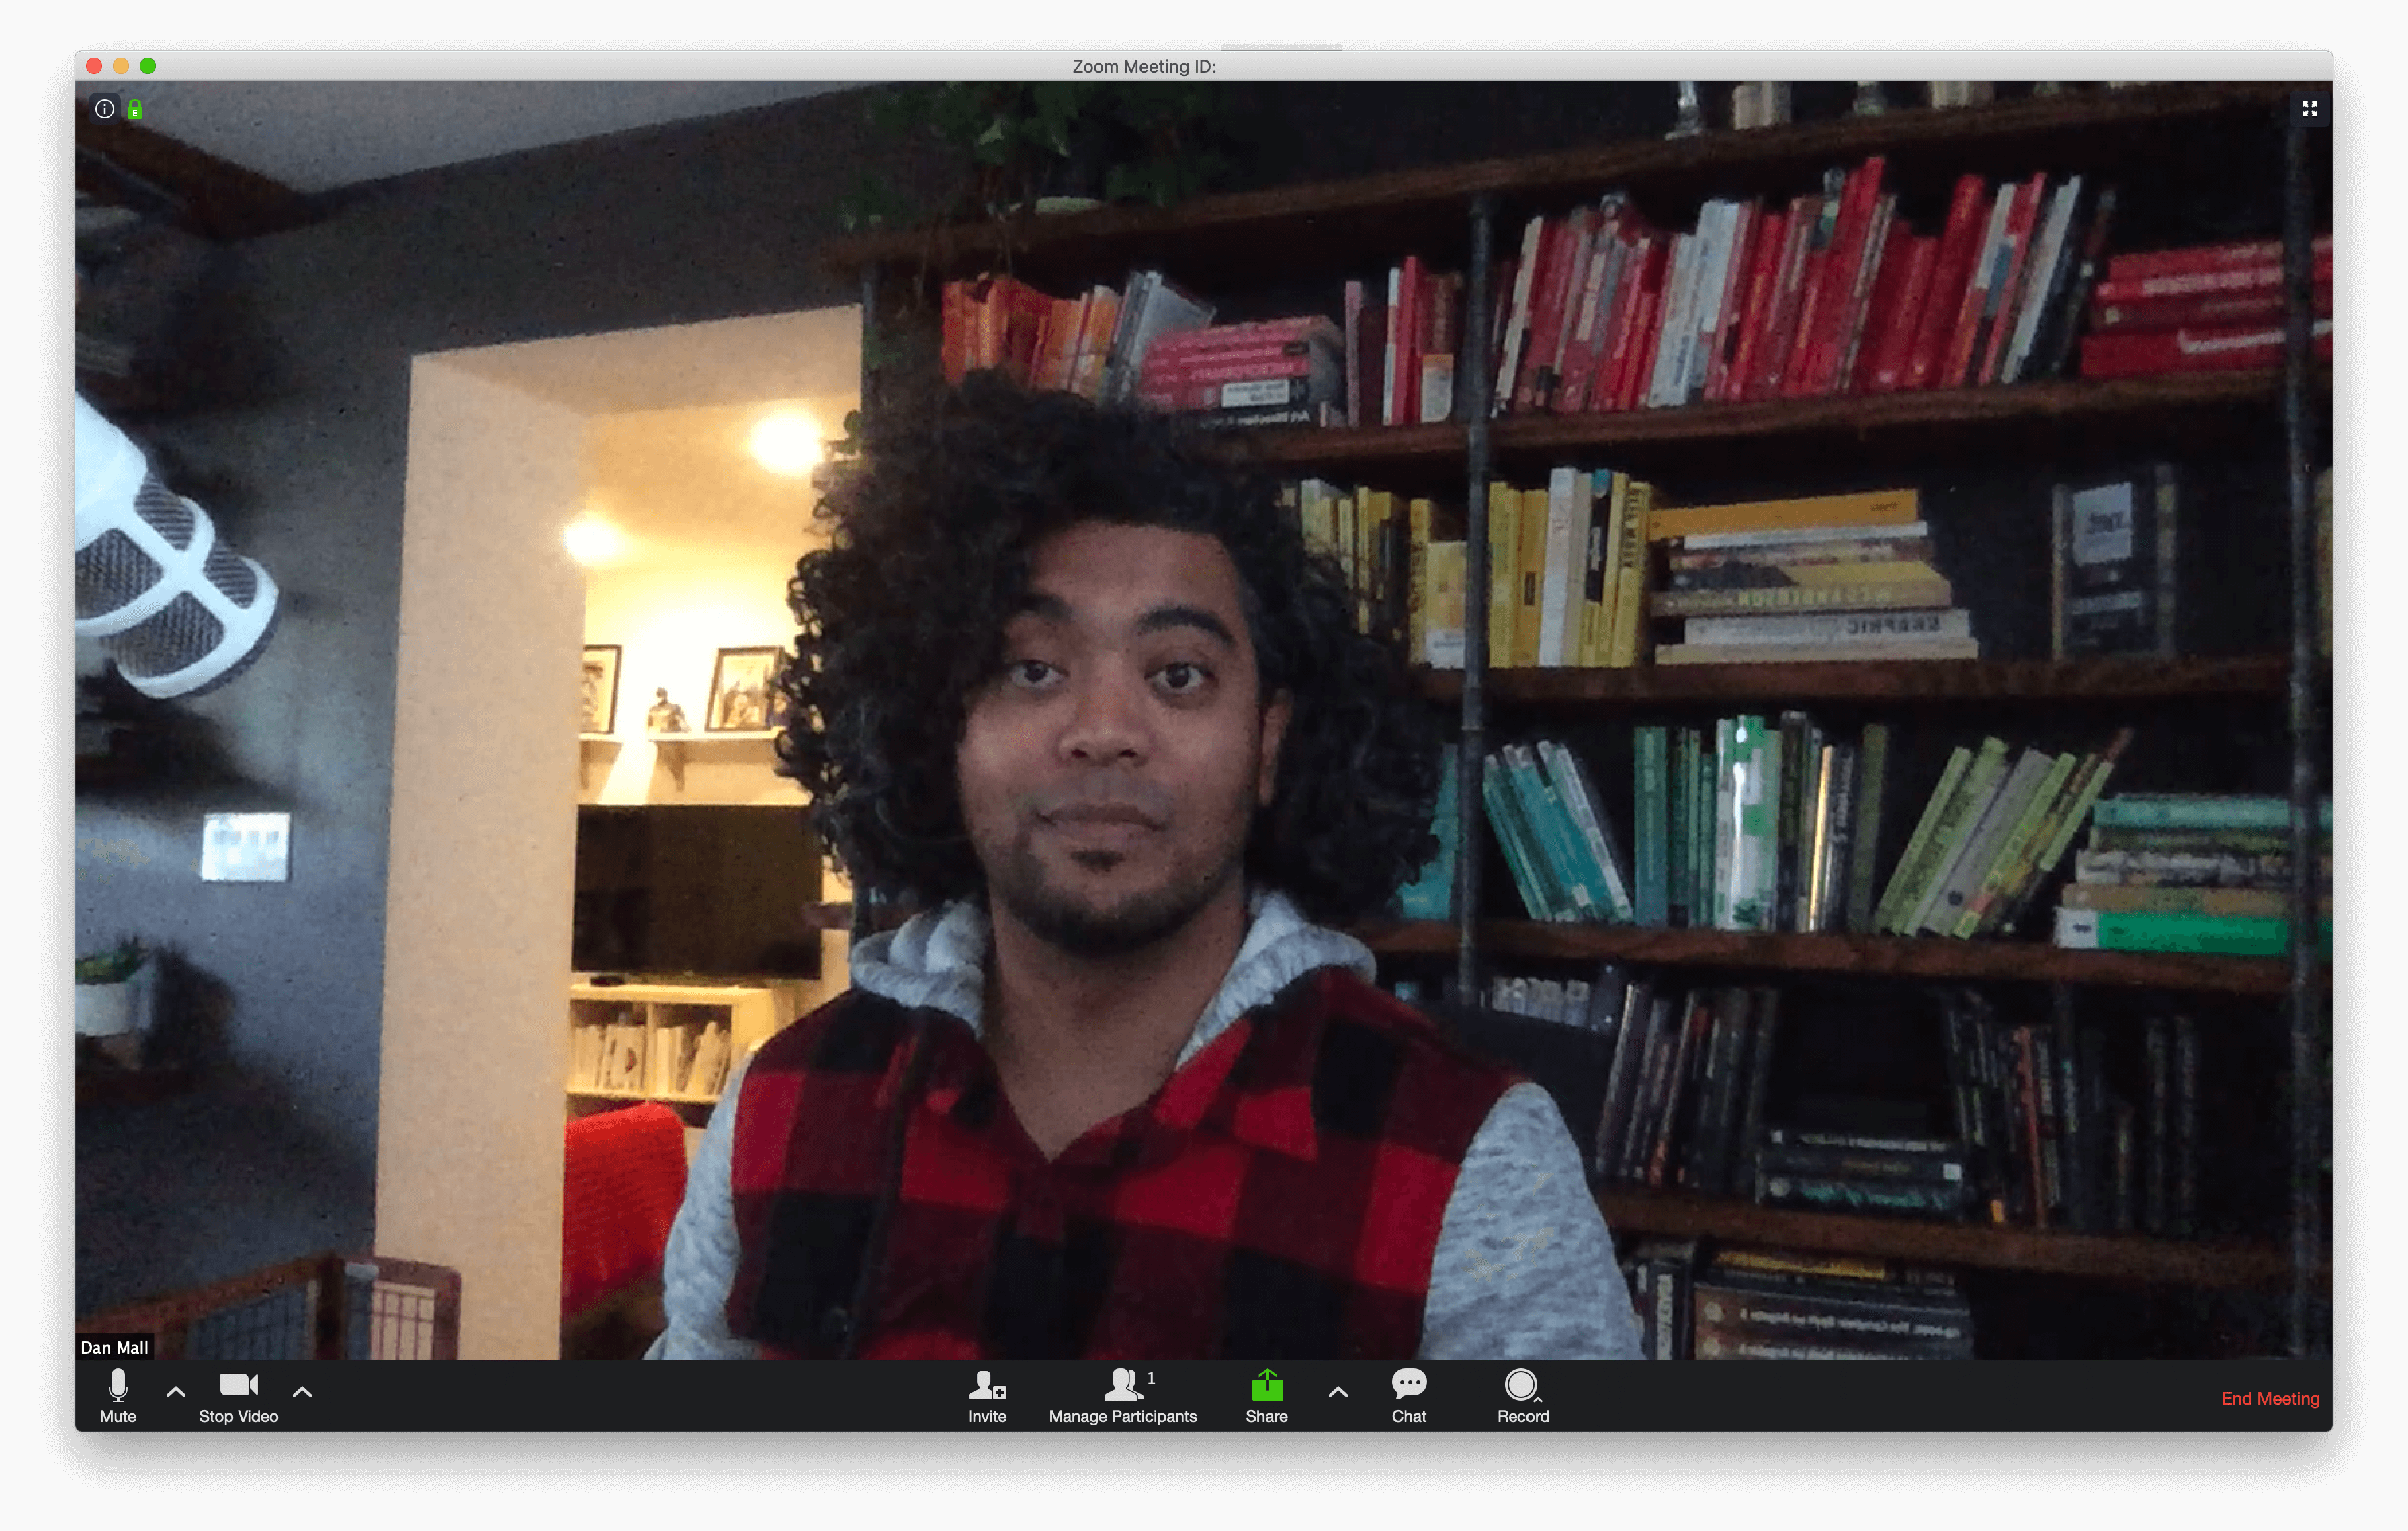 Video call image from MacBook Pro built-in FaceTime camera